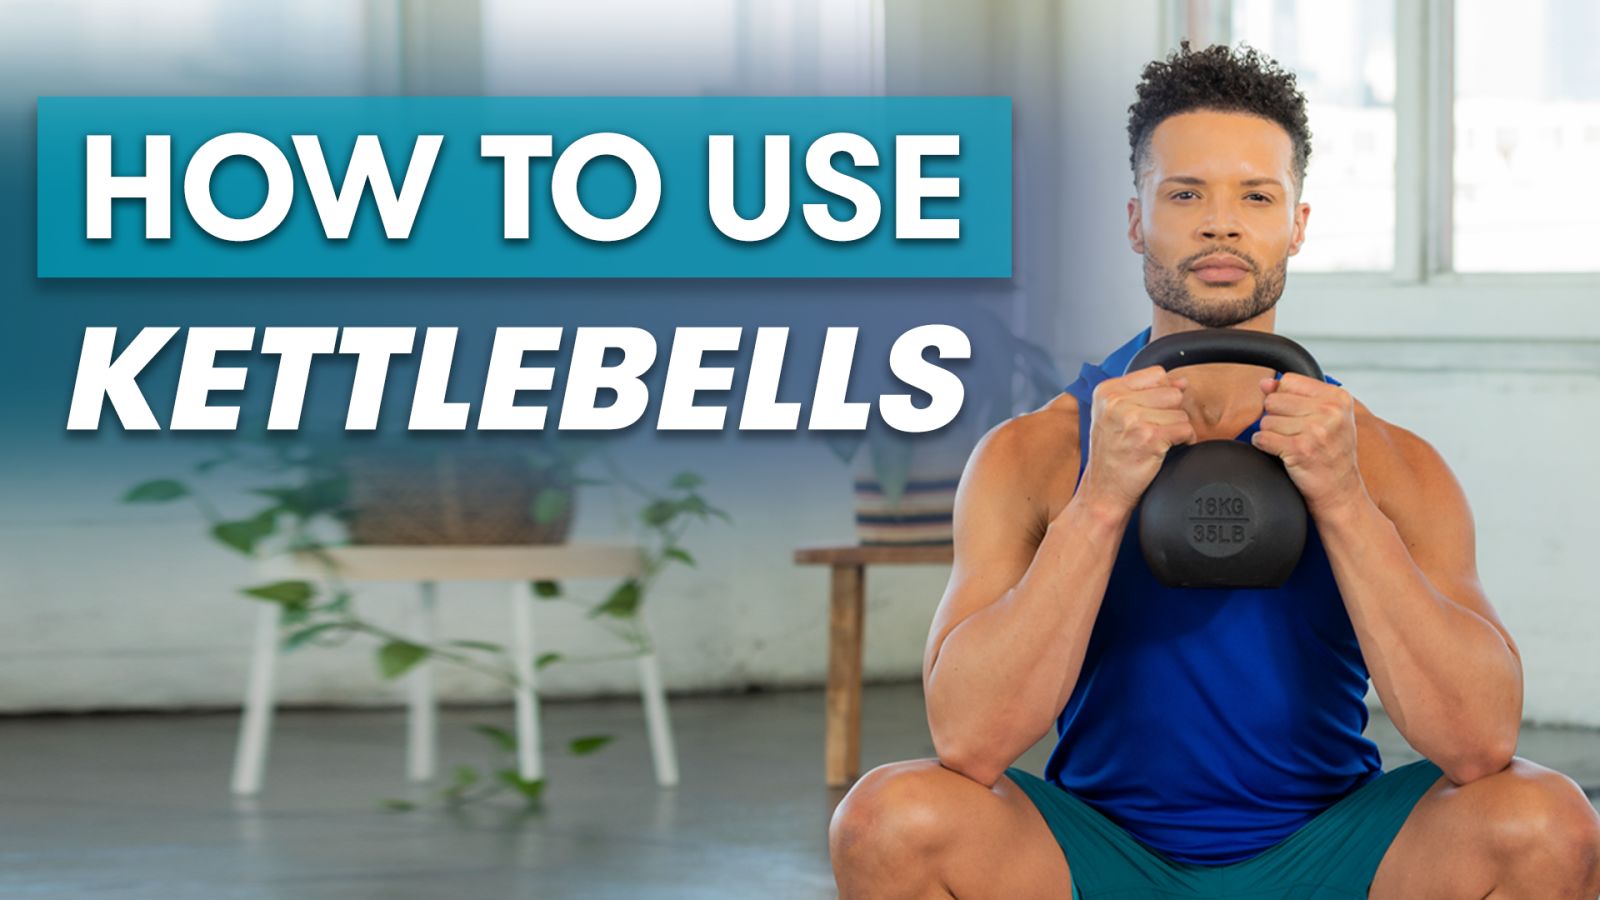 How To Use Kettlebells: Form & Safety